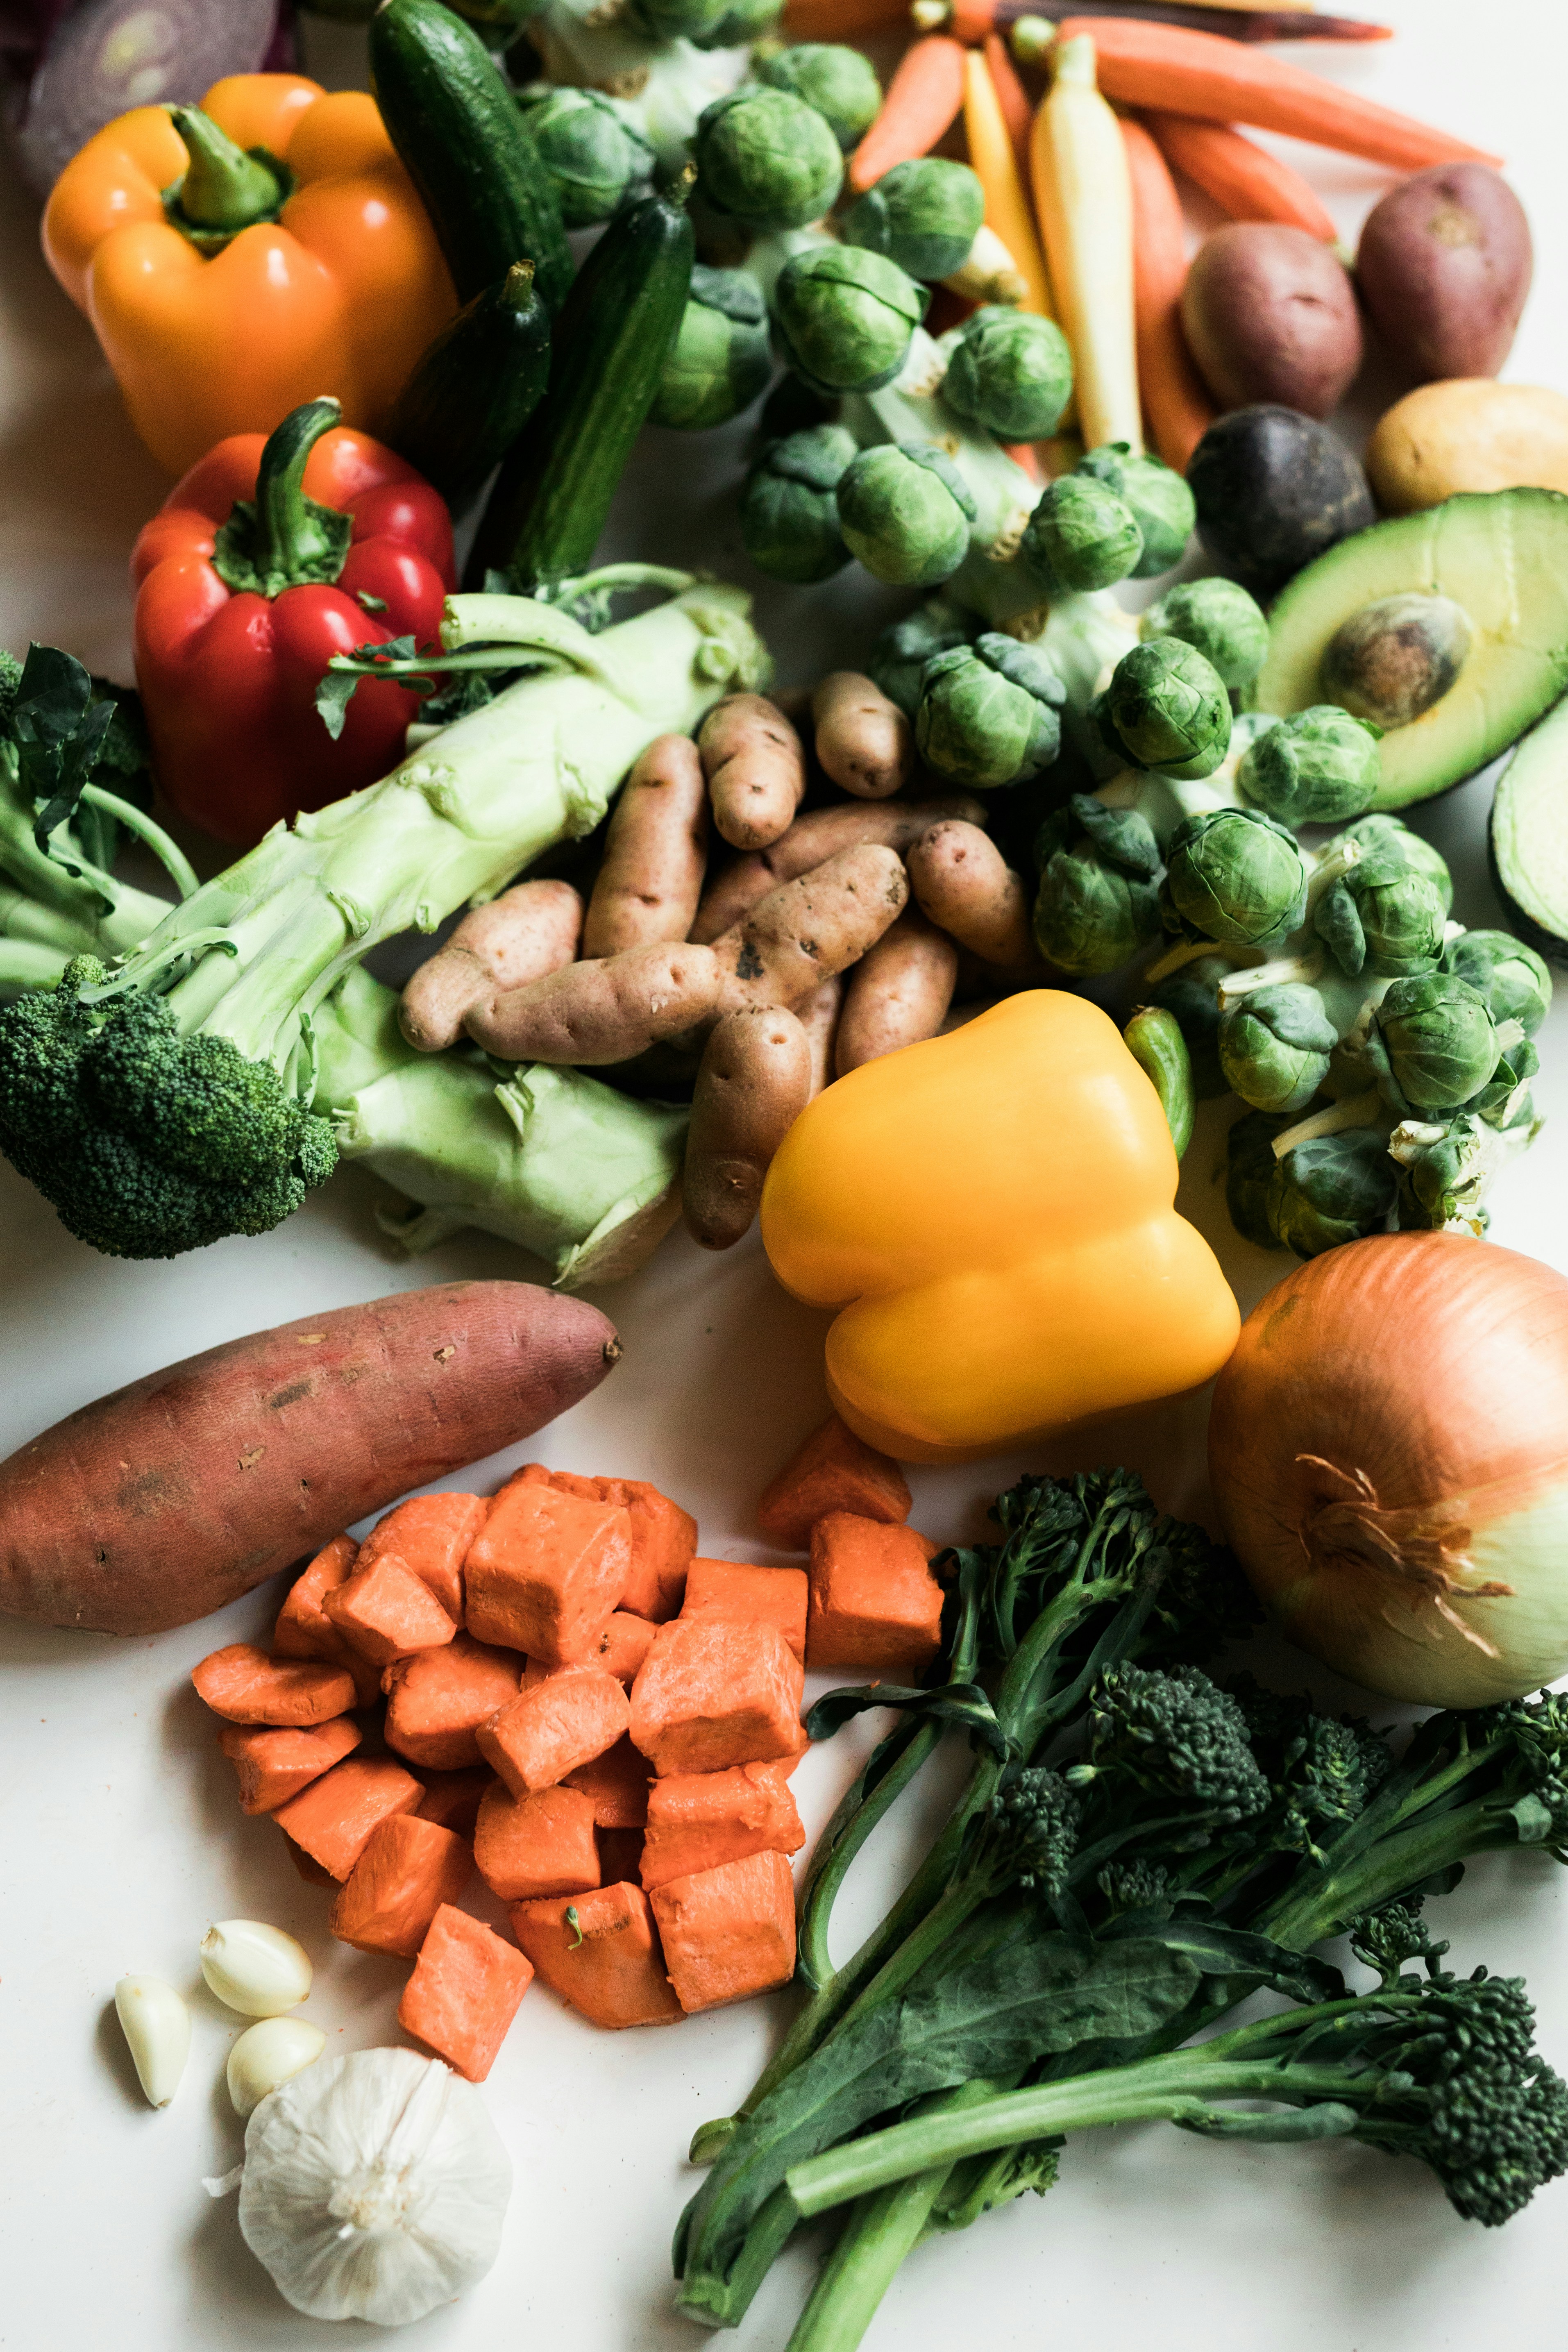 Why Vegetables are Essential for a Balanced and Healthy Diet